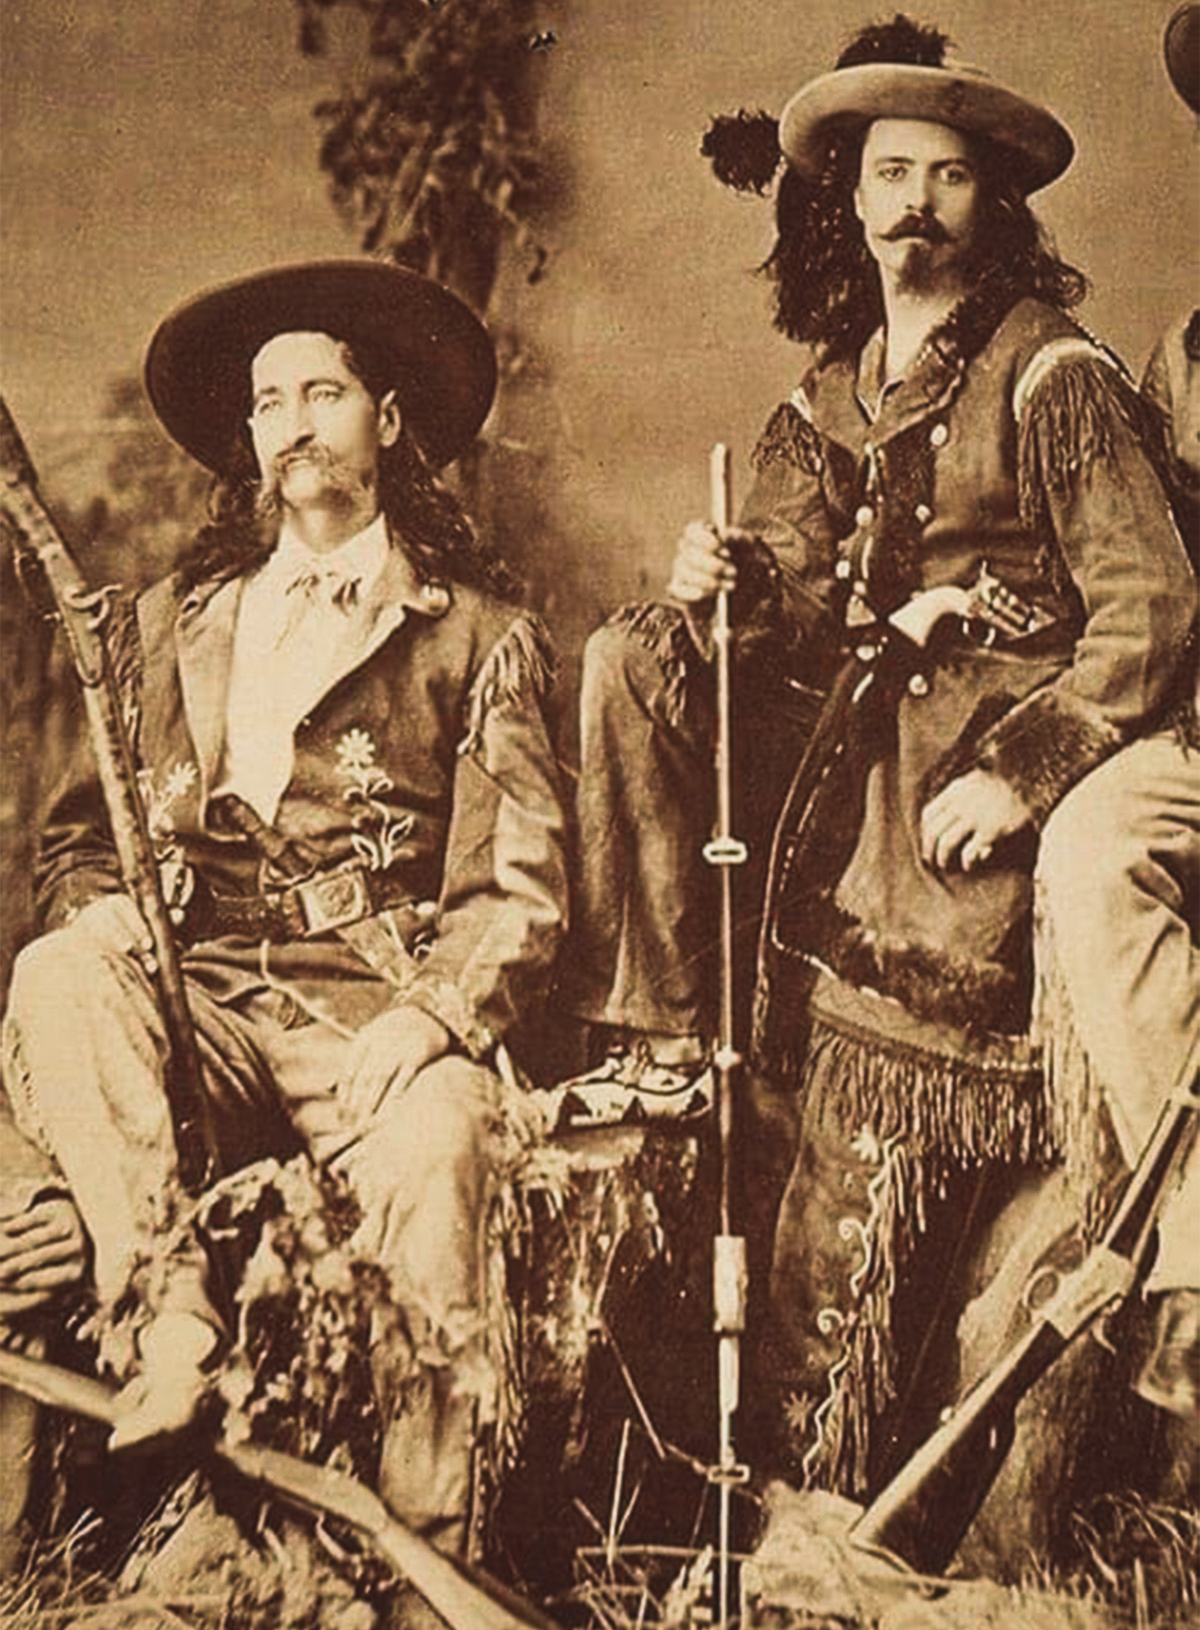 William Frederick (Buffalo Bill) Cody turned the Wild West into vaudeville entertainment